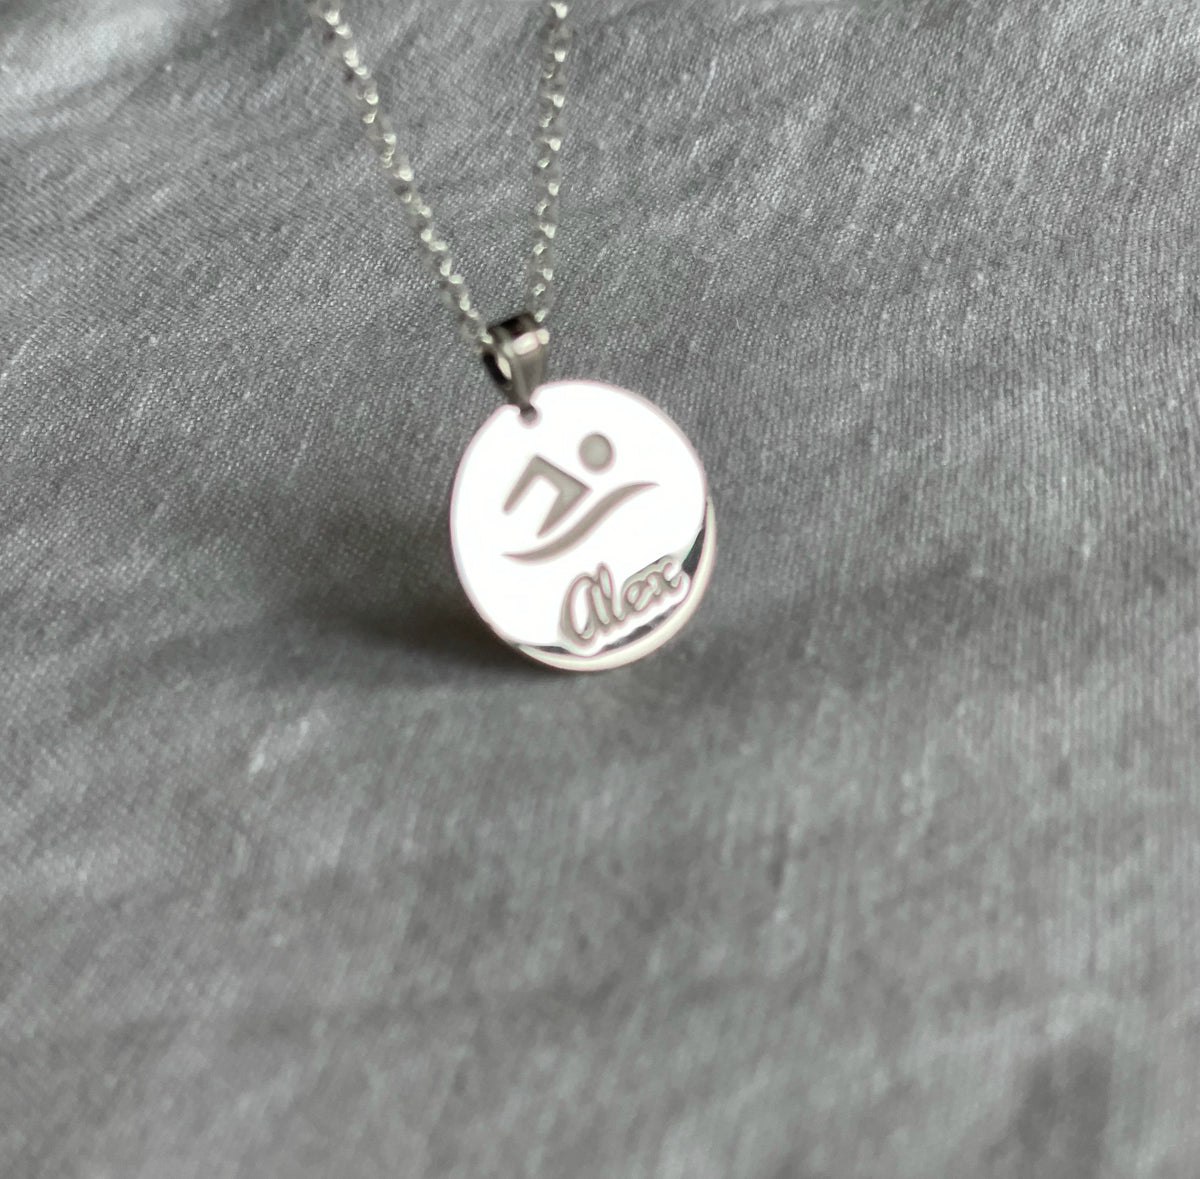 Personalized Swimmer Pendant w/ Name & Necklace included  in Sterling Silver , Gold Plated or 10k Gold Laser Engraved - Gift Box Included